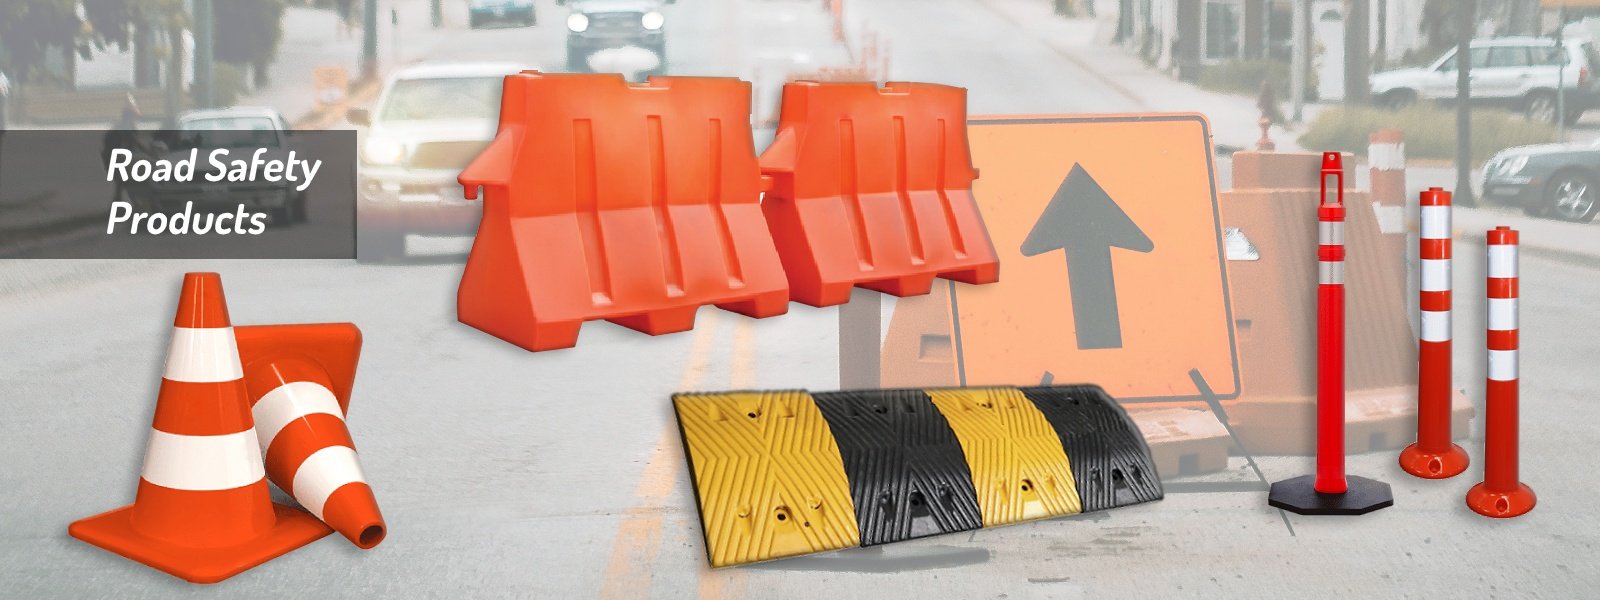 What are the Benefits of Road Safety Equipment?